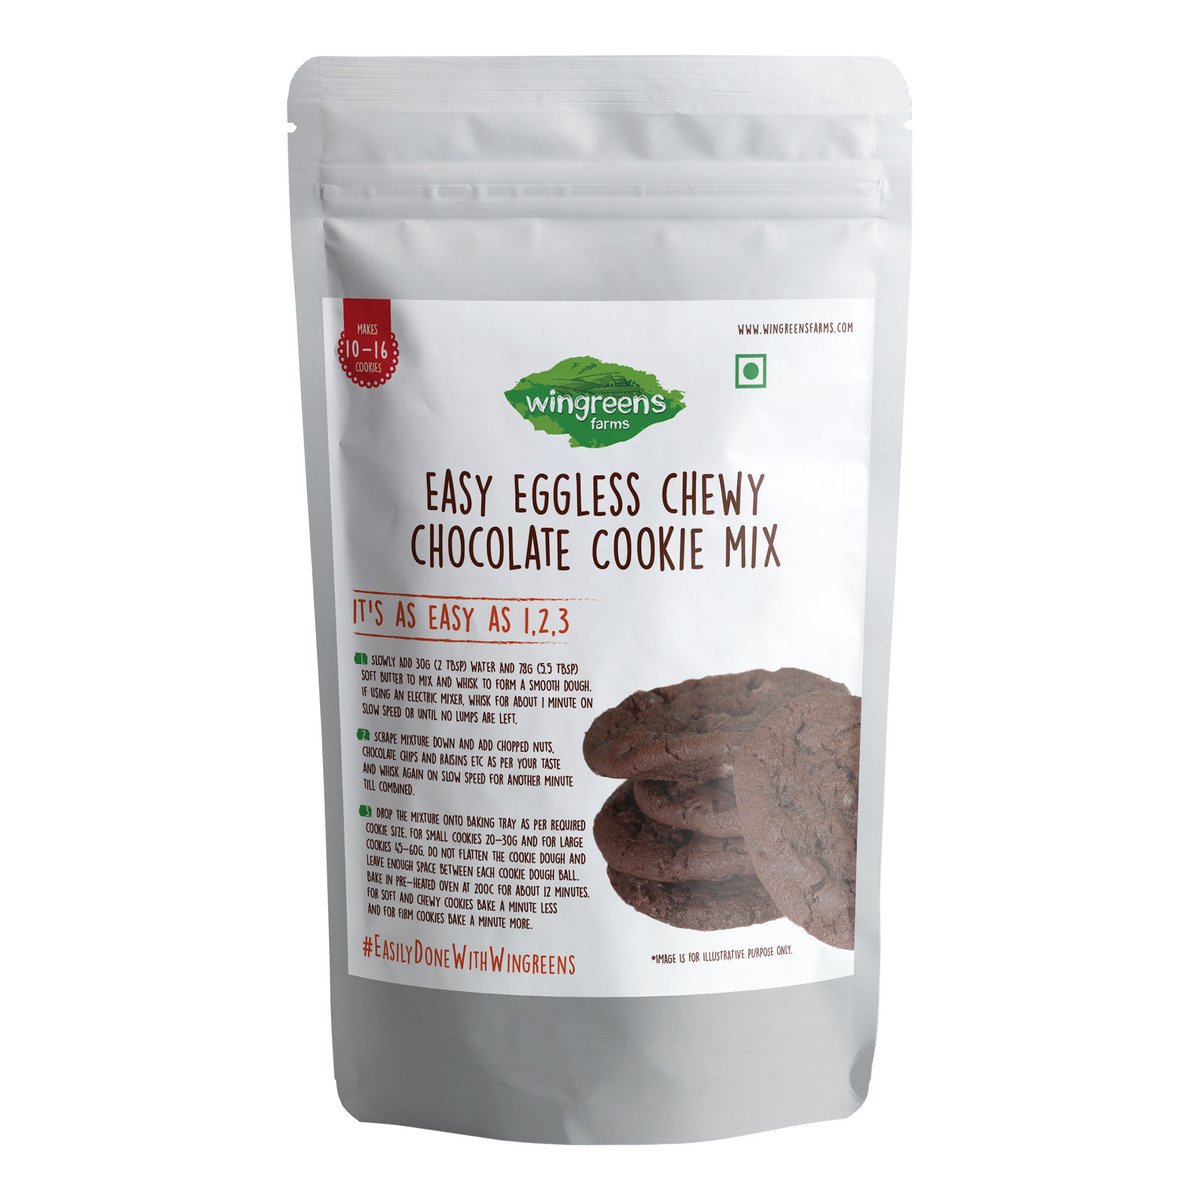 Wingreens Farms Easy Eggless Chewy Chocolate Cookie Mix 300 g